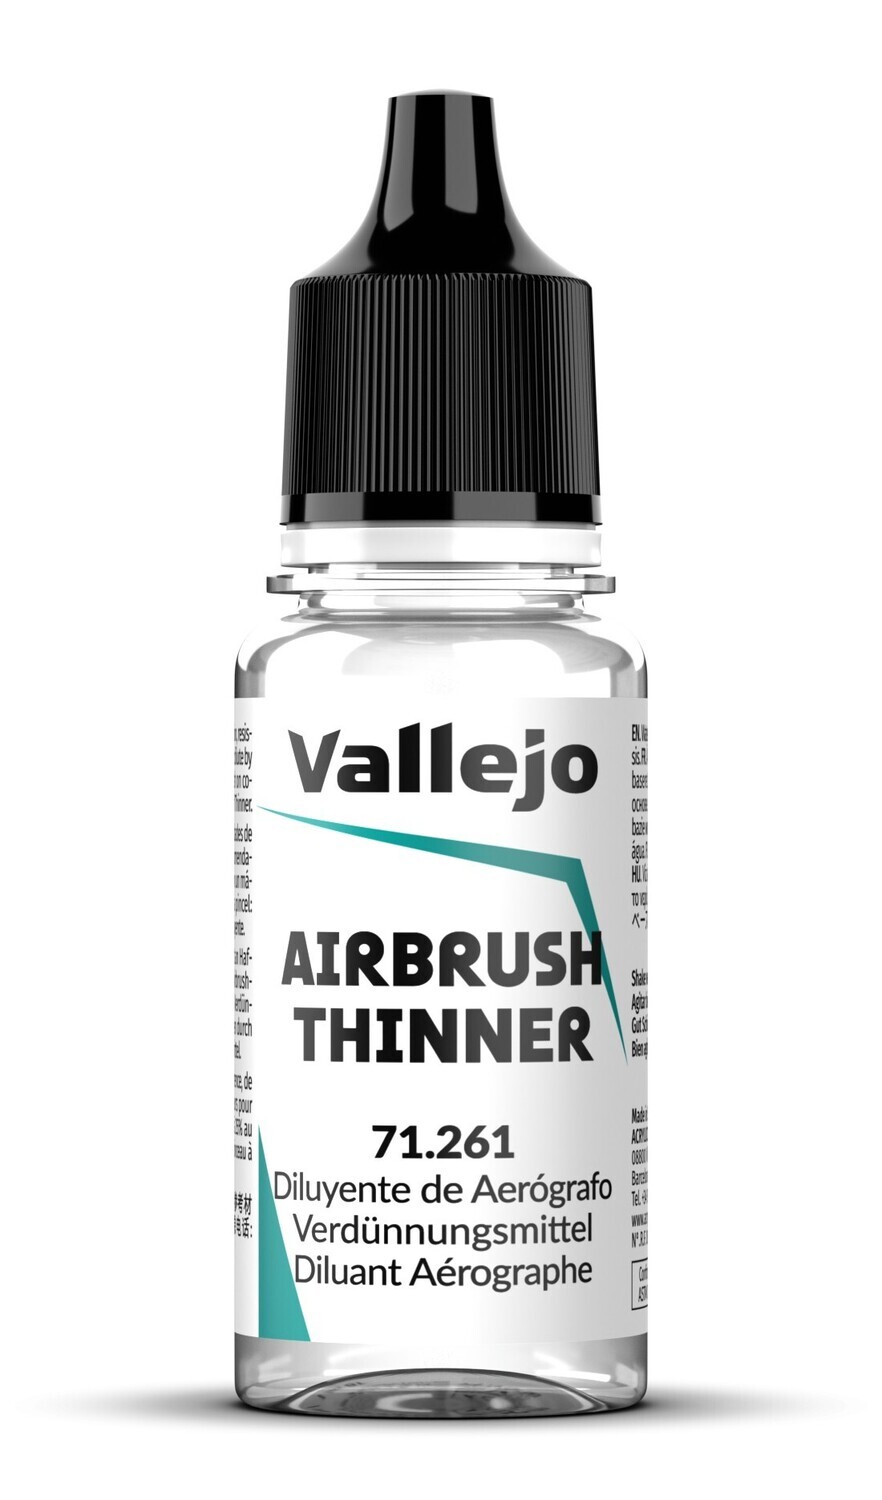 Airbrush Thinner 18 ml - Auxiliary - Vallejo